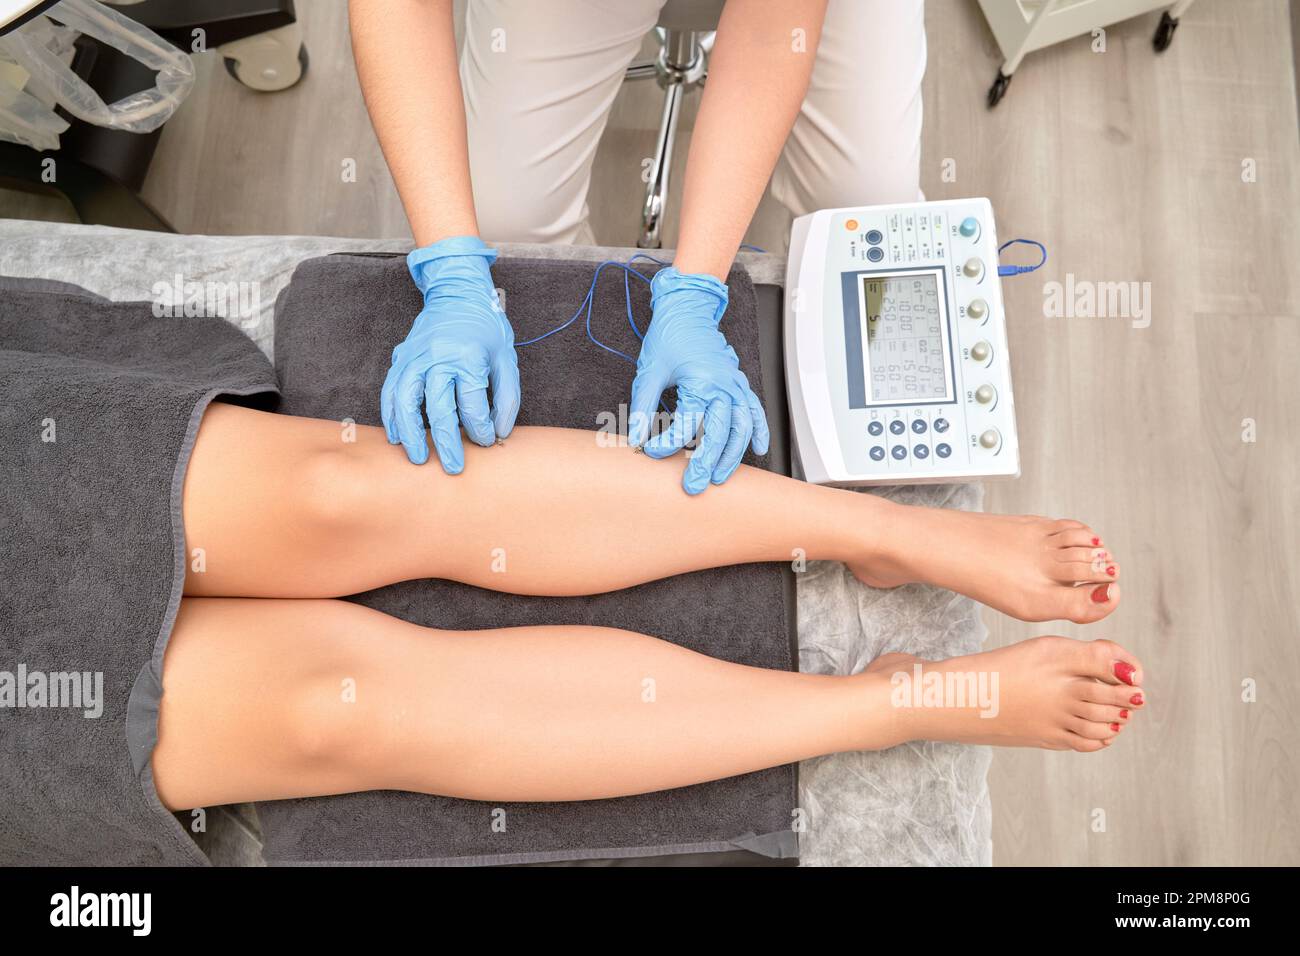 An experienced physiotherapist administers safe and effective percutaneous electrolysis therapy to a patient's leg using modern electrotherapy equipment.  Stock Photo